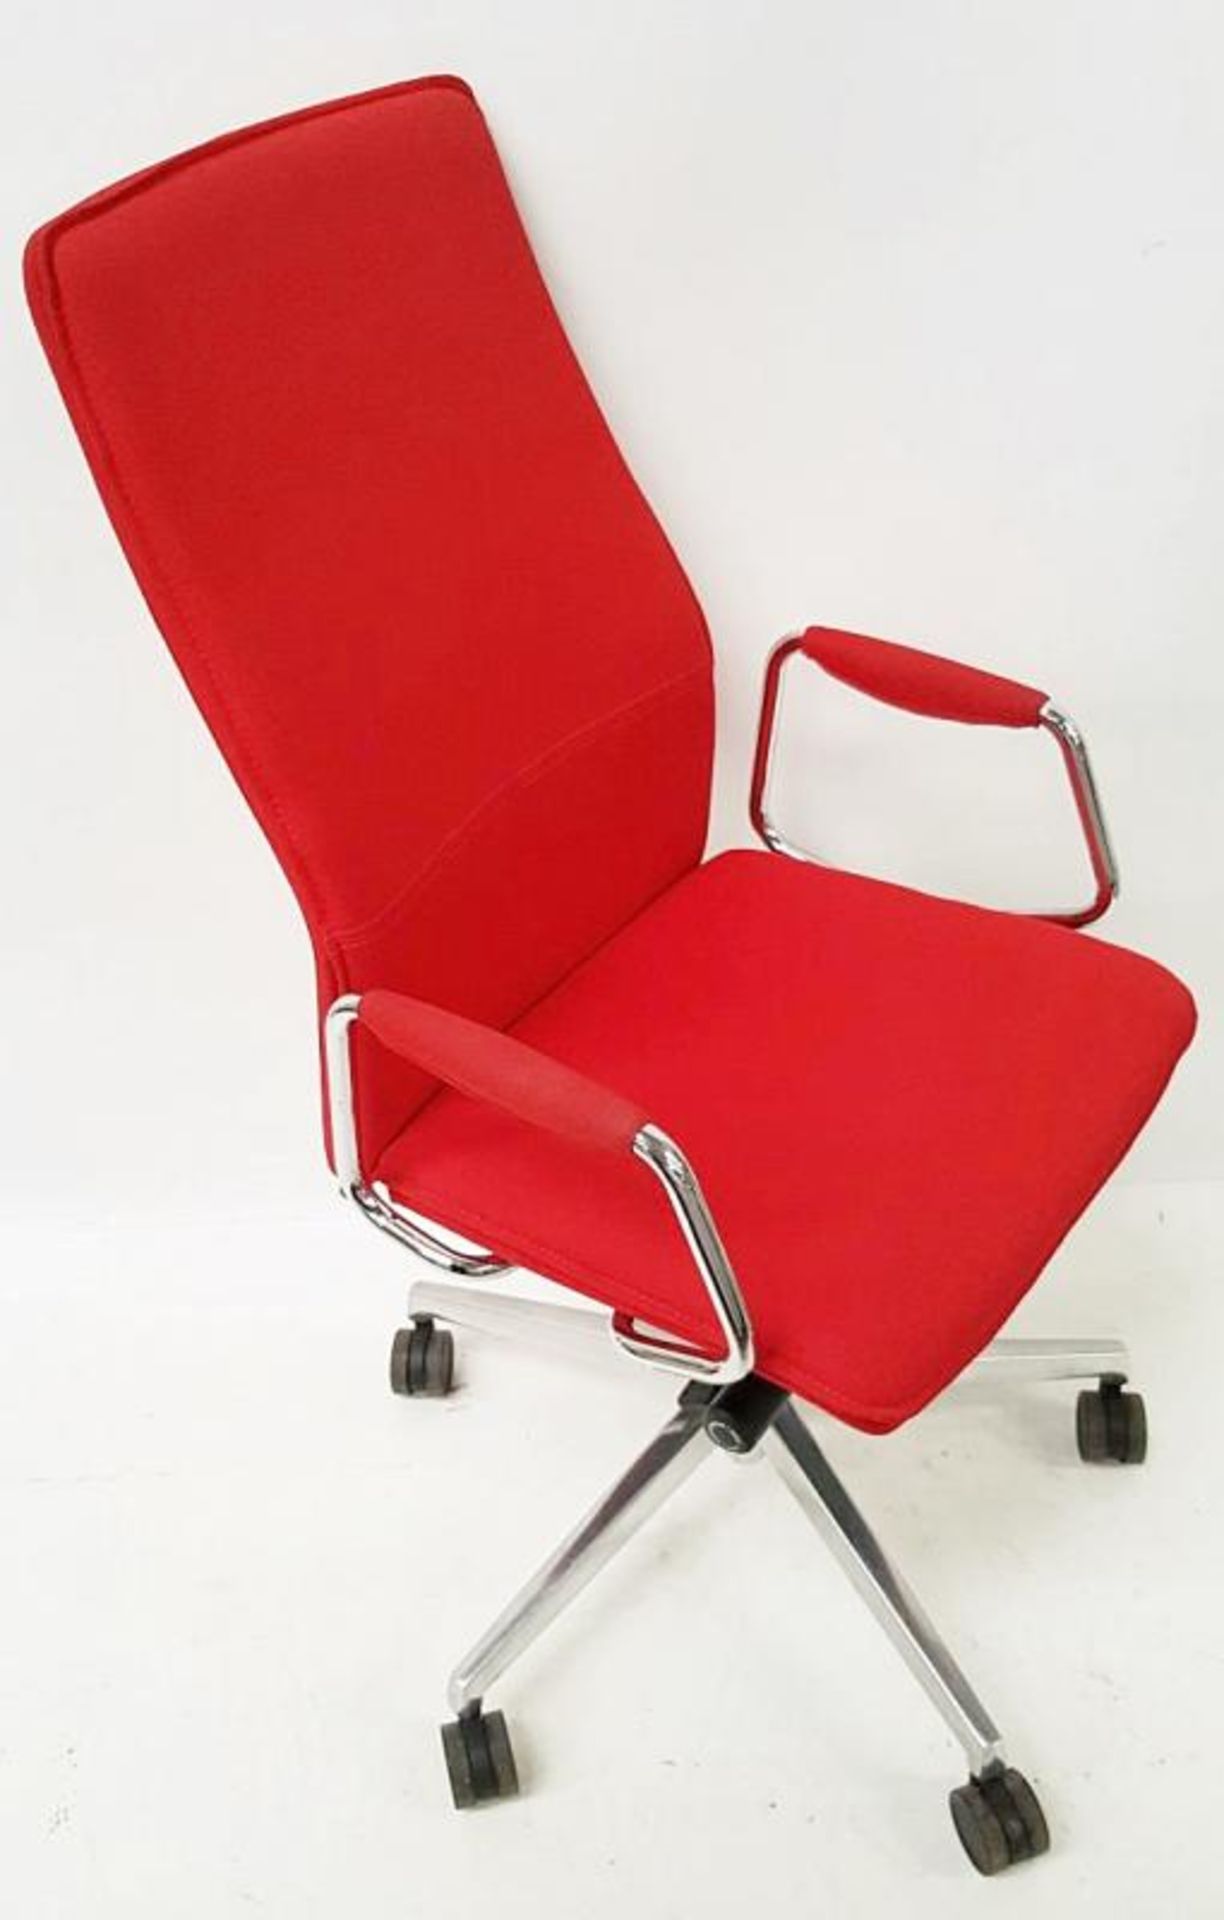 4 x 'Sven Christiansen' Premium Designer High-back Office Chairs In Red (HBB1HA) - Used, In Very Goo - Image 8 of 8